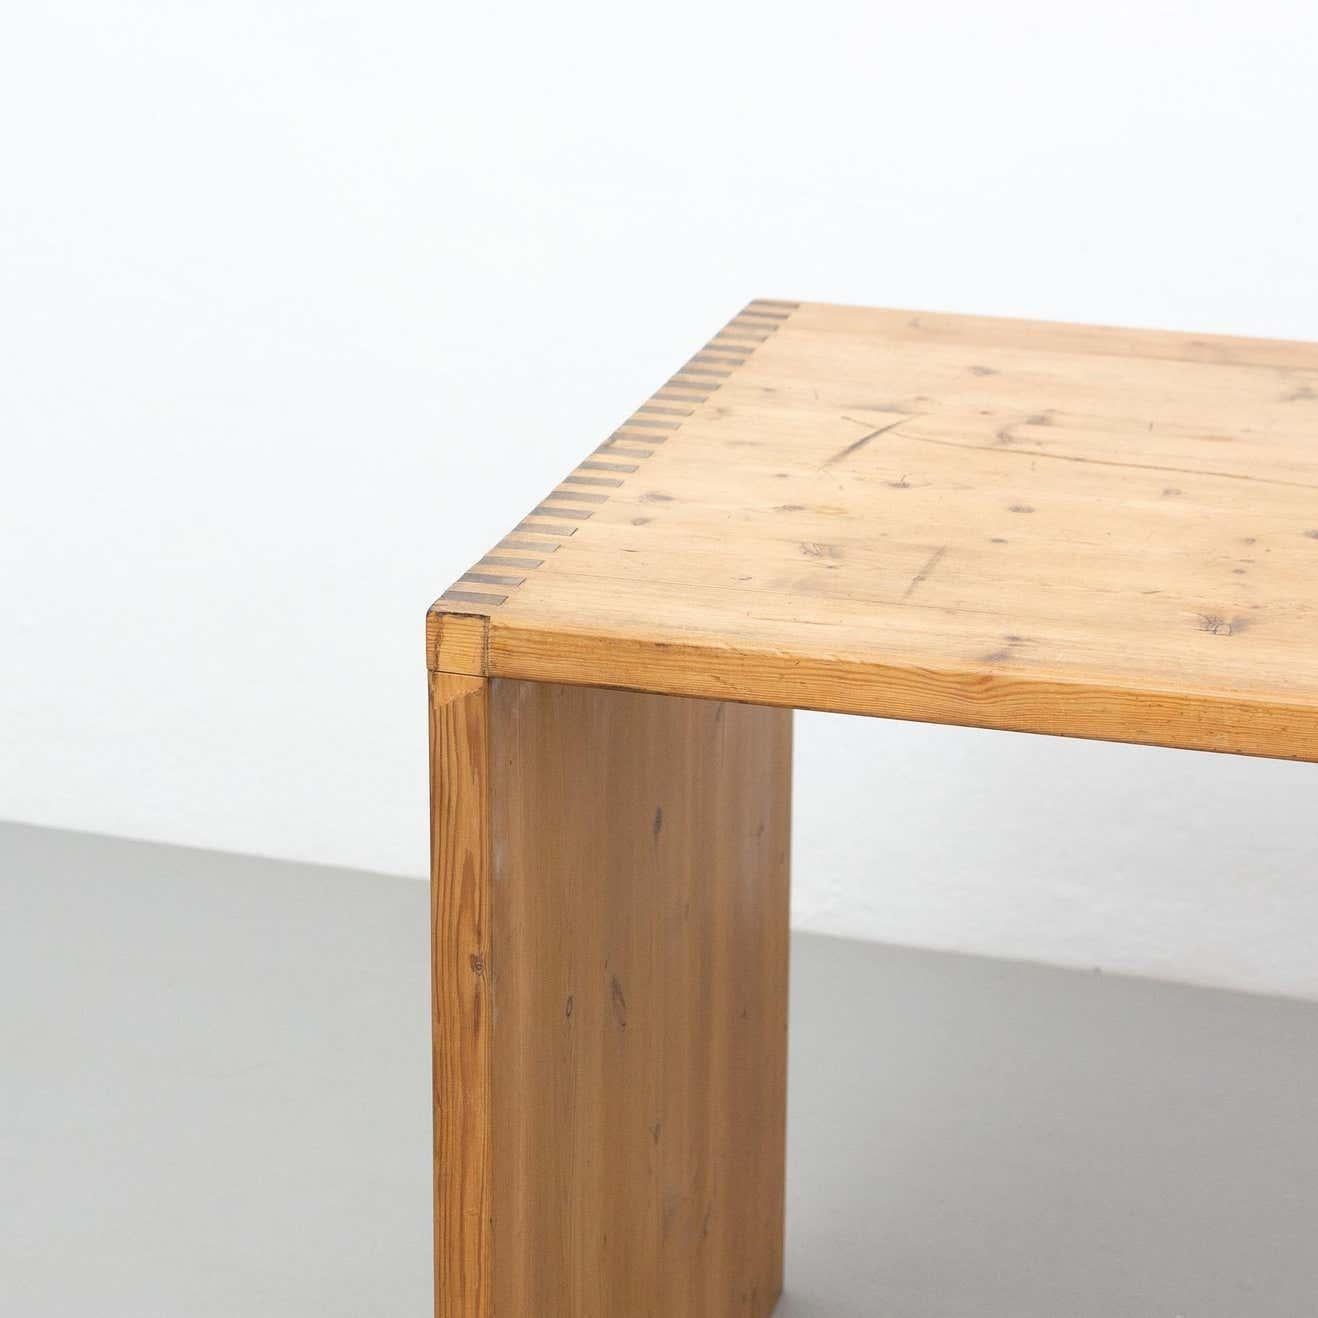 Mid-20th Century Mid-Century Modern Rationalist Wood Table, circa 1960 For Sale